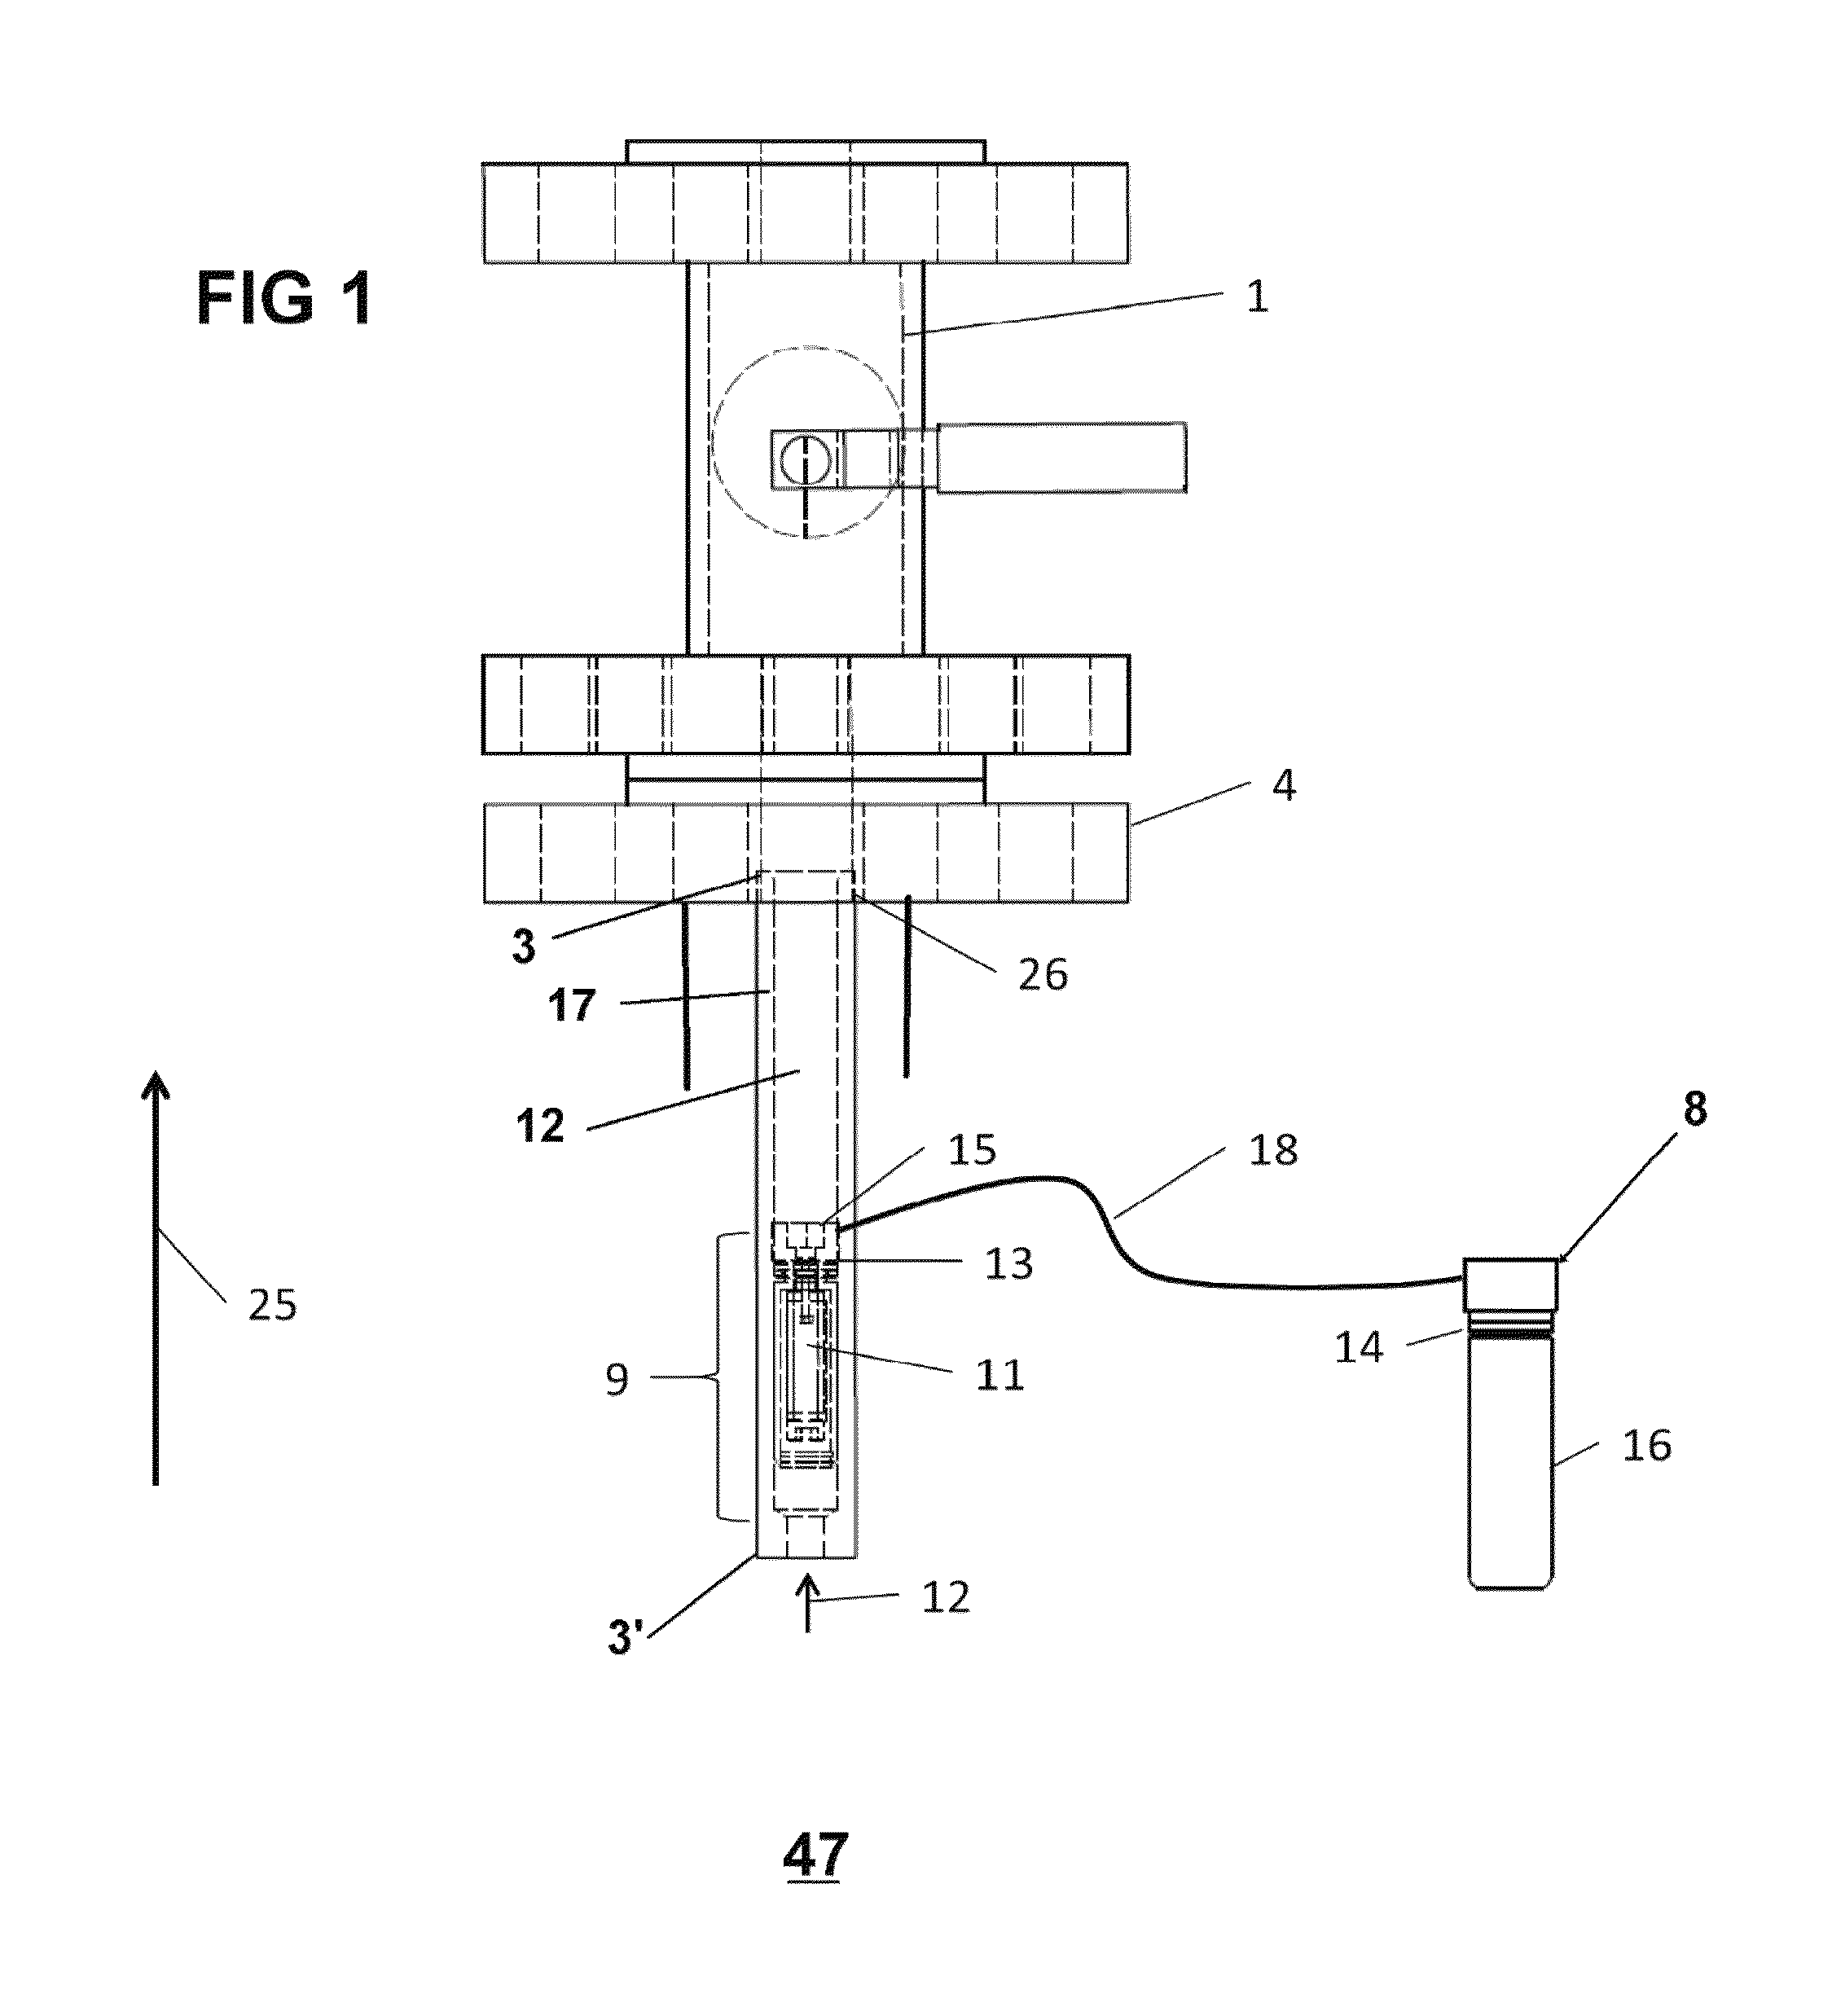 Apparatus for analytical sampling and/or conditioning of a process gas with selective isolation capability, and method therefore